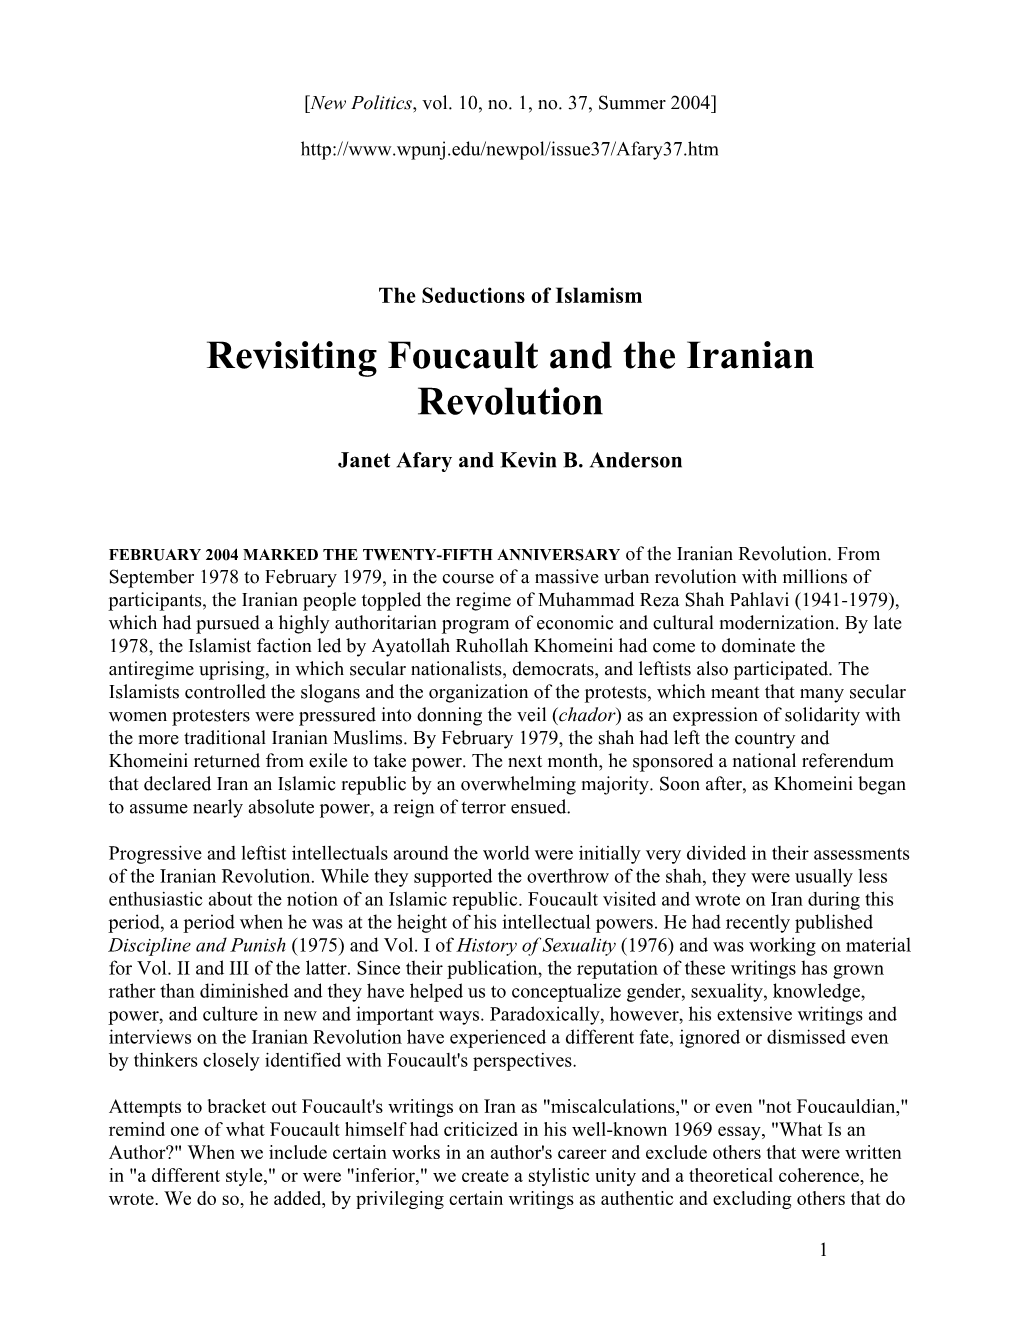 Revisiting Foucault and the Iranian Revolution